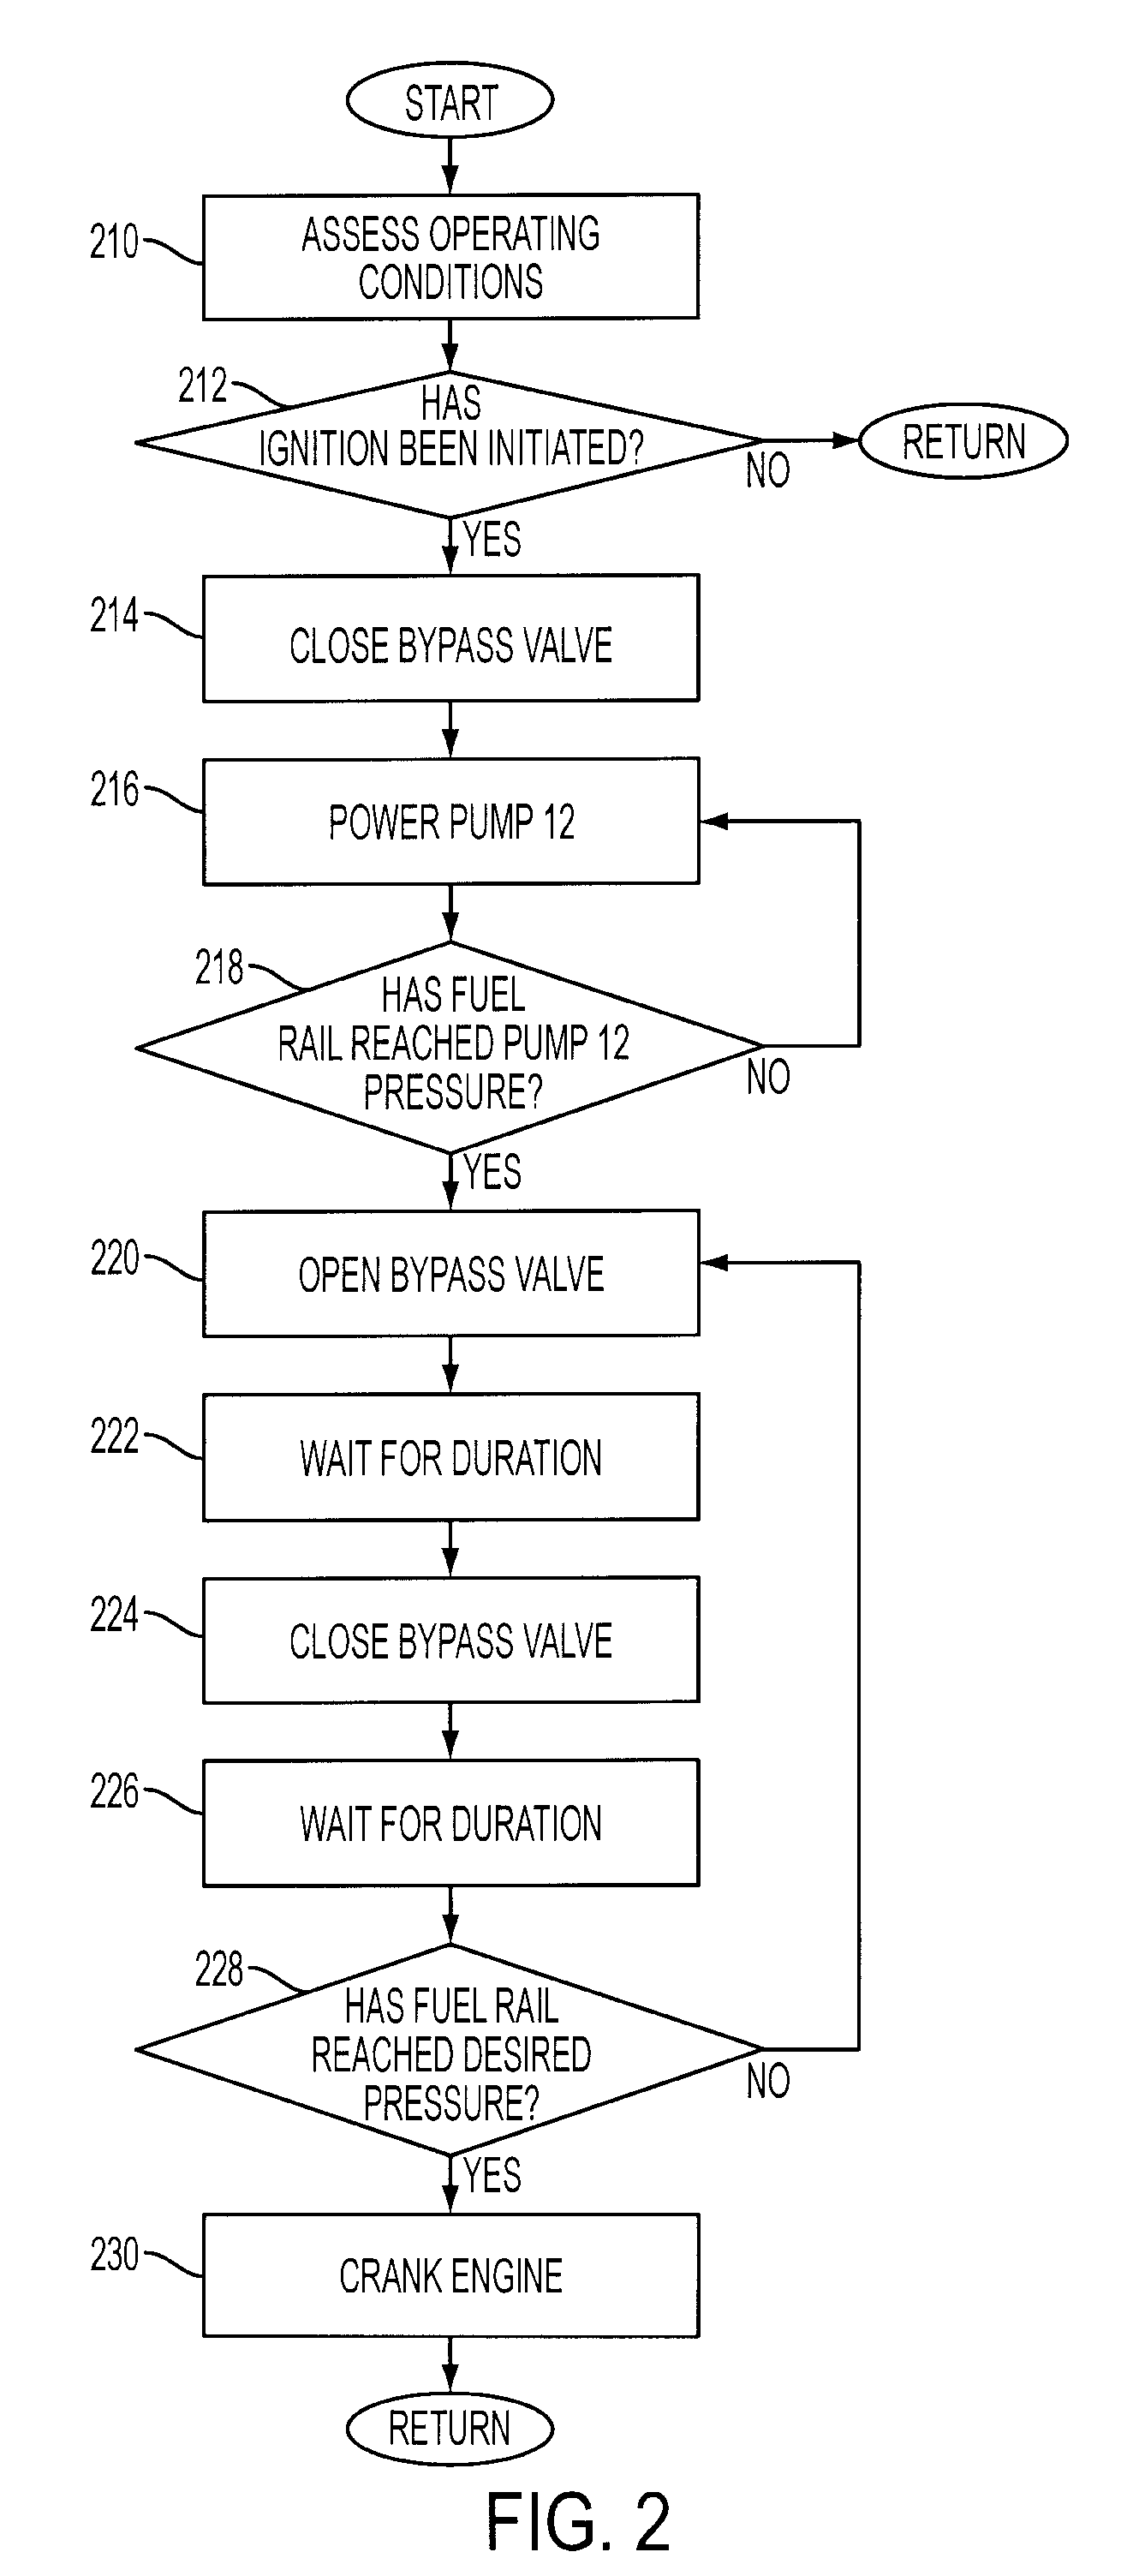 Direct injection fuel system utilizing water hammer effect